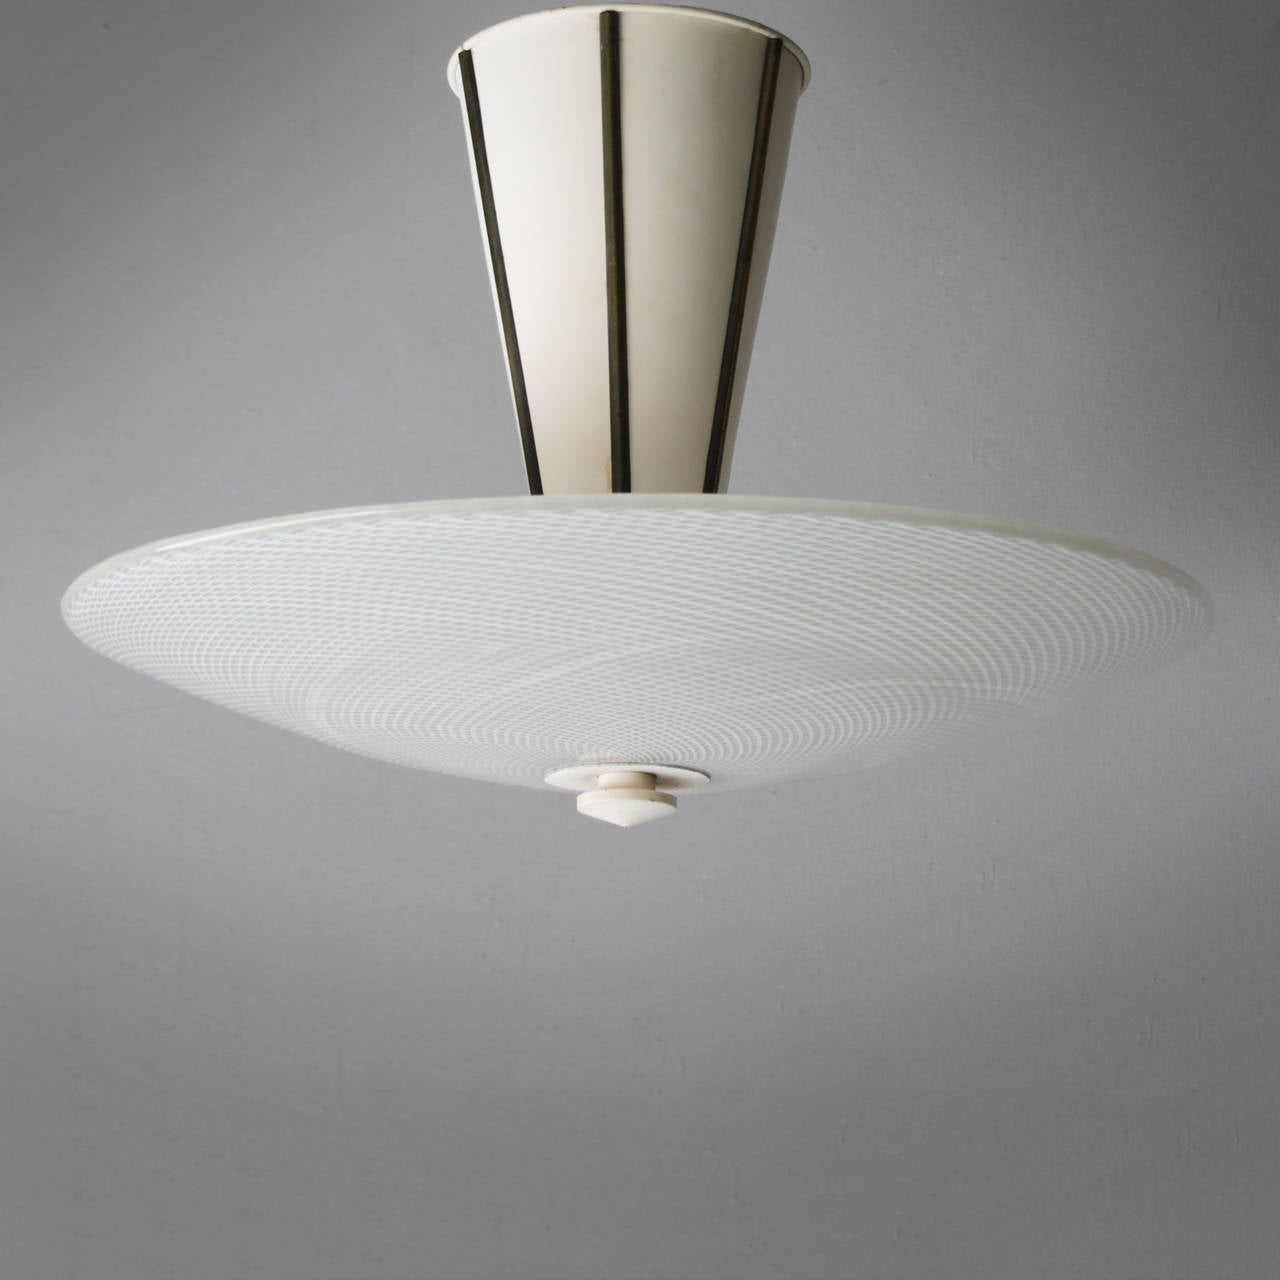 Impressive Italian ceiling light by the famous Murano based company Venini. This ceiling lamp was most likely designed by Tomaso Buzzi (1900-1981), though it does show similarities with lighting designs of Carlo Scarpa as well. The 22 inch (!)